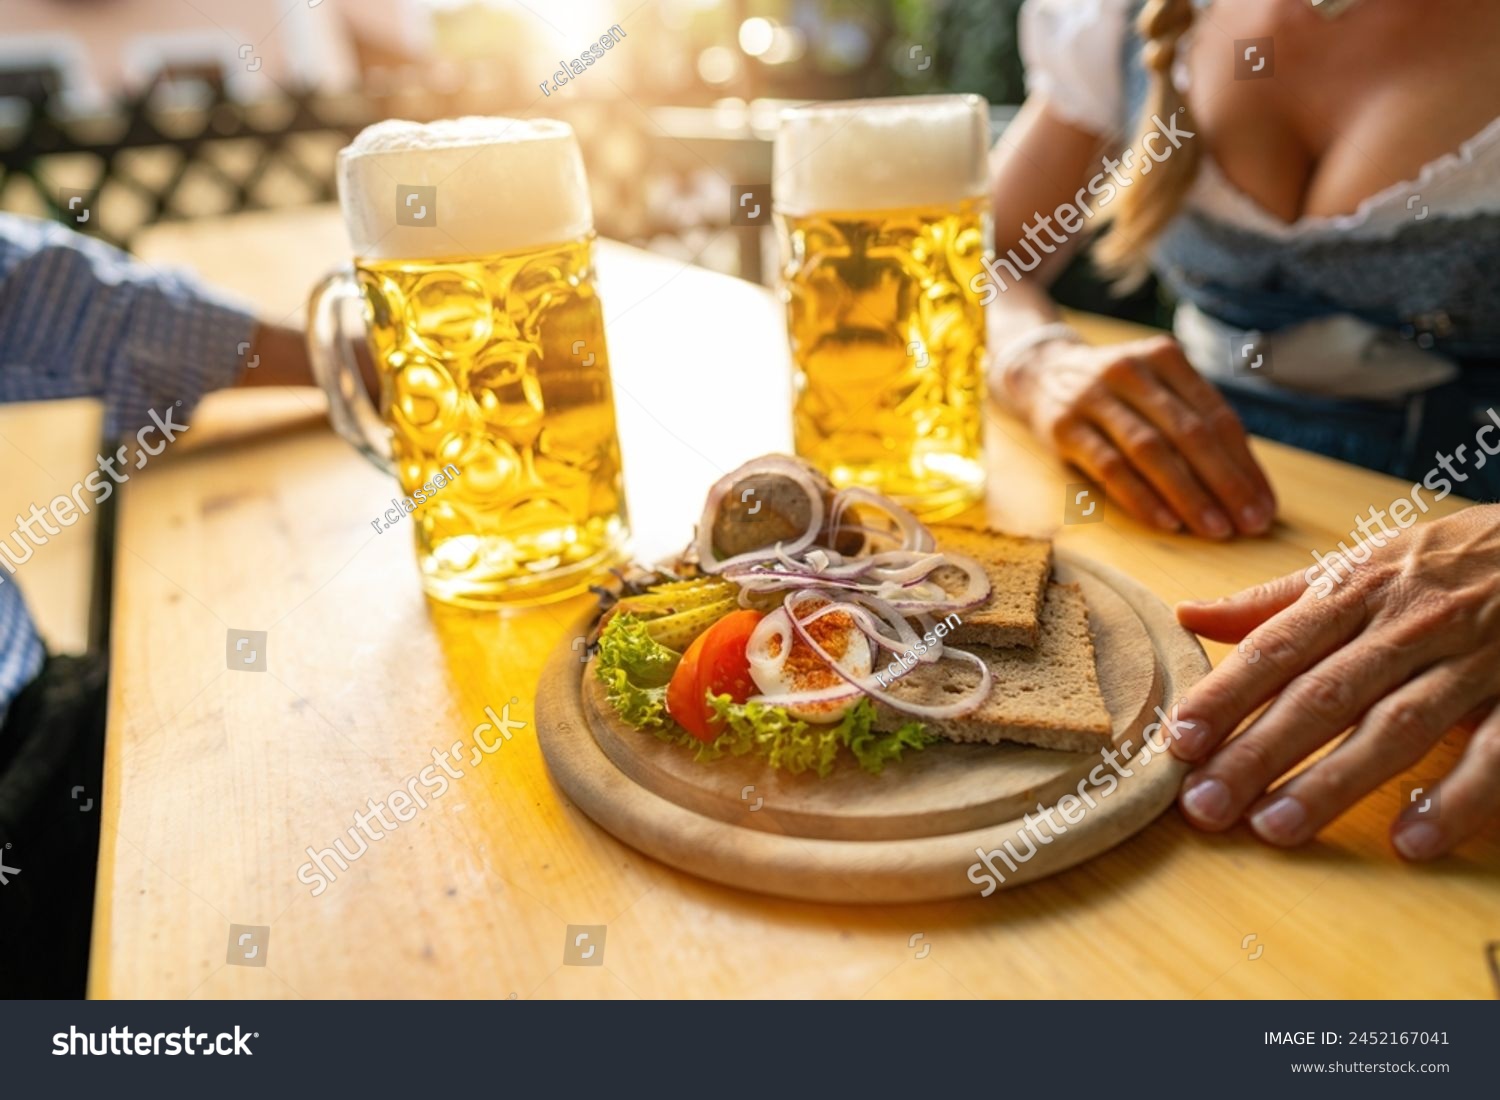 Traditional Bavarian Obatzda with pretzels and radishes and beer mugs, man and young woman in tracht in the background at beer garden or oktoberfest, Munich, Germany #2452167041